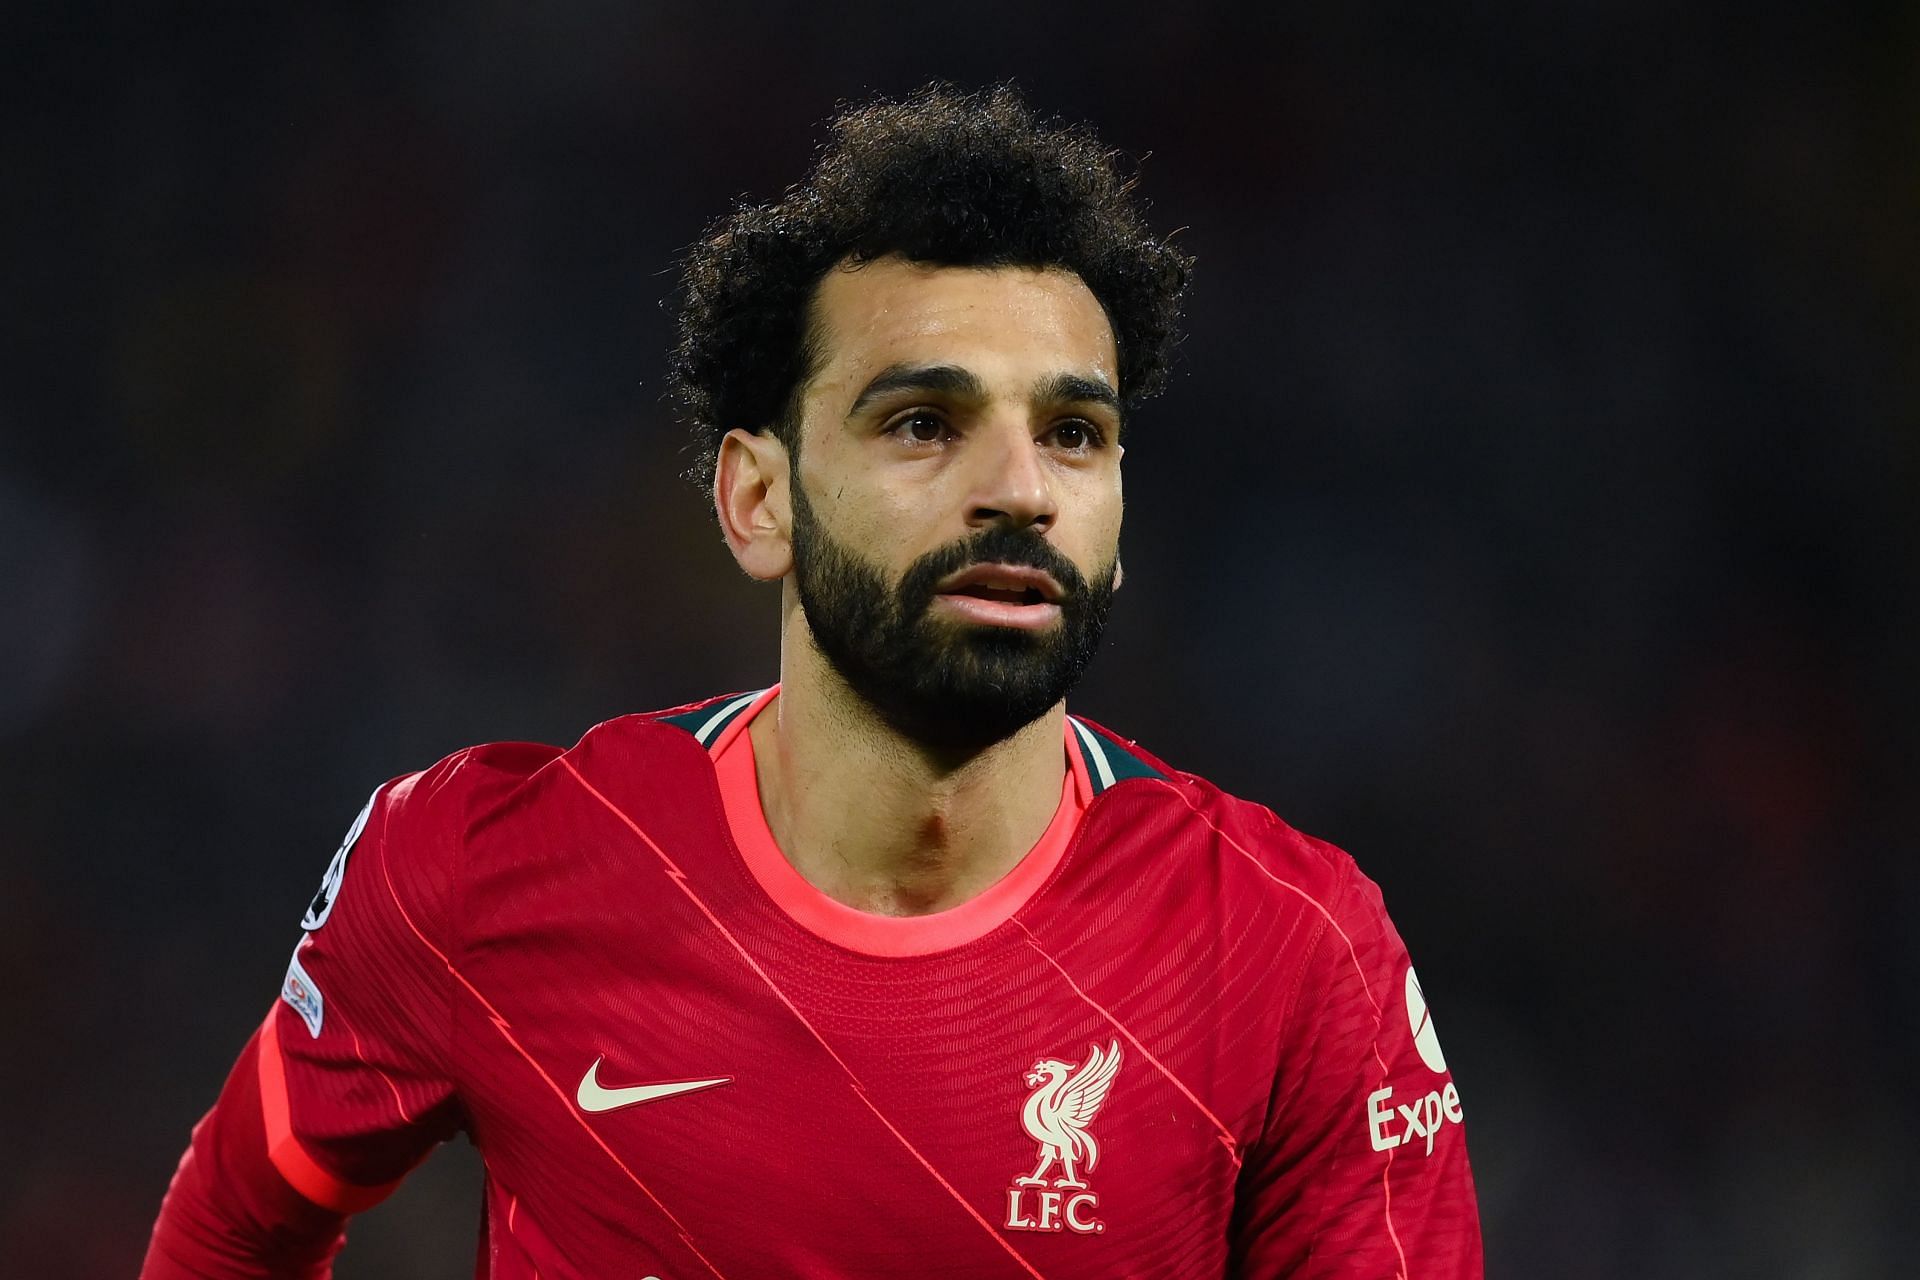 Salah has been spectacular for the Reds